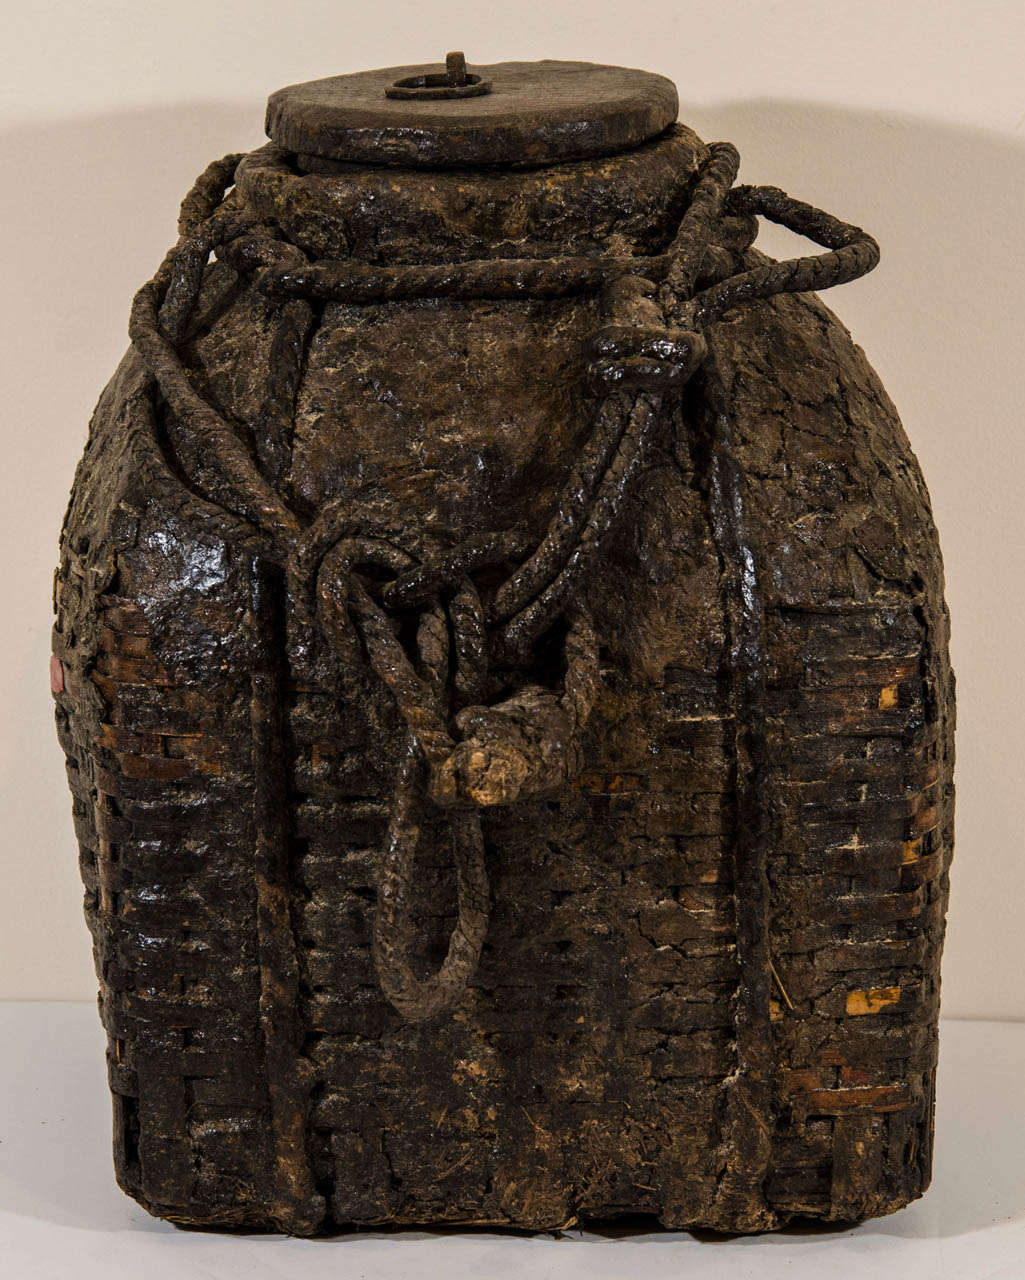 A beautifully shaped and weathered antique Chinese food oil container. From Shanxi Province, c. 1880.
M145
a b h a y a